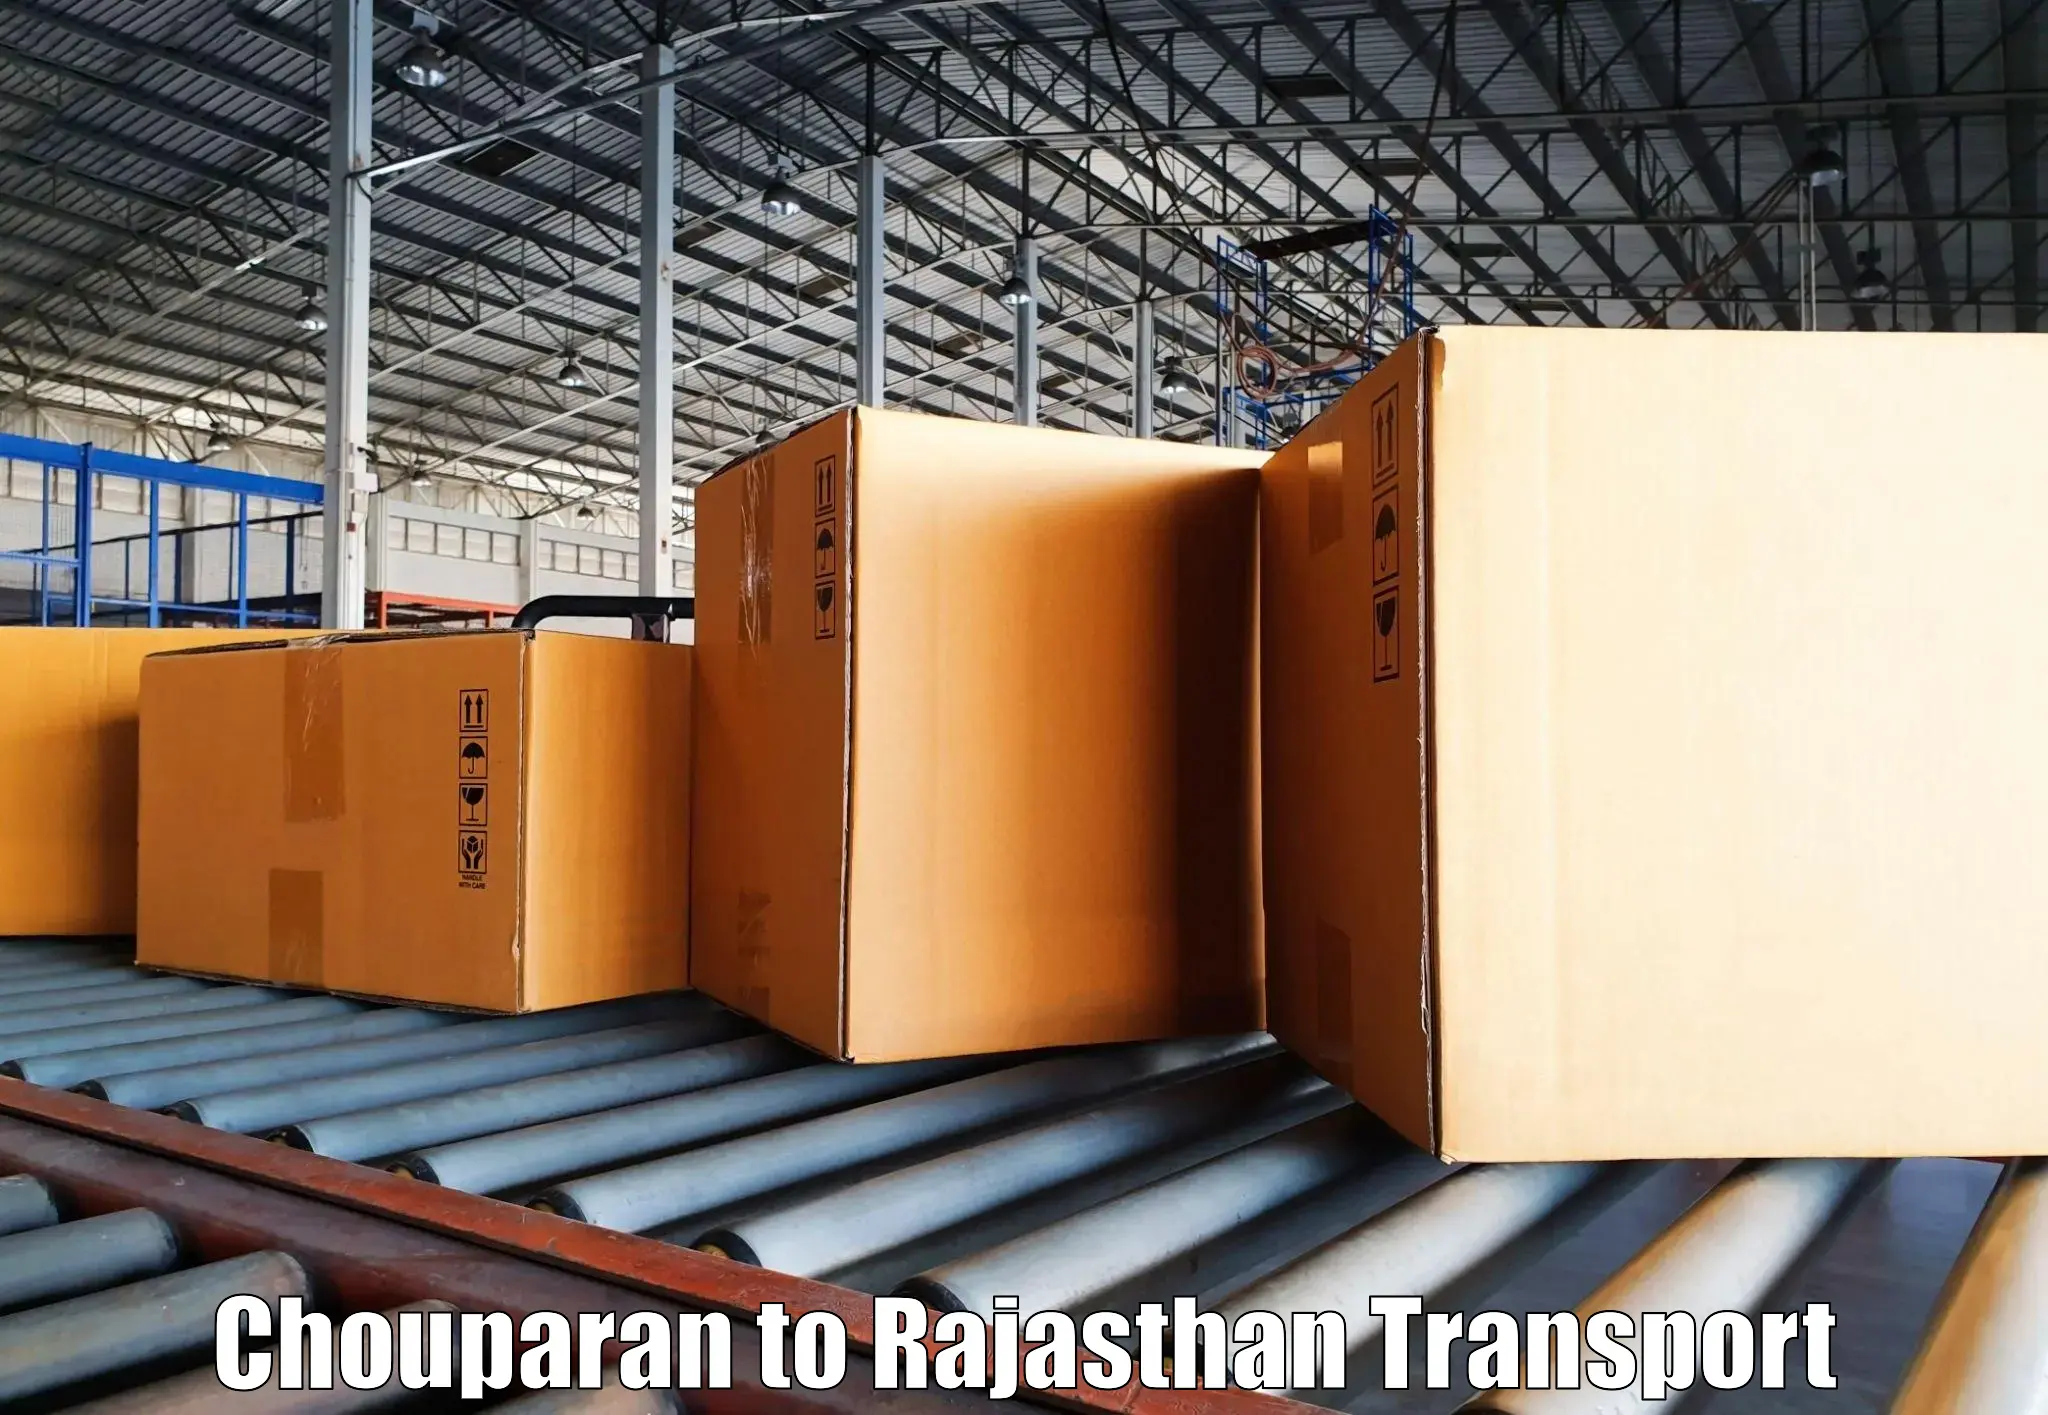 Truck transport companies in India Chouparan to Dhorimana